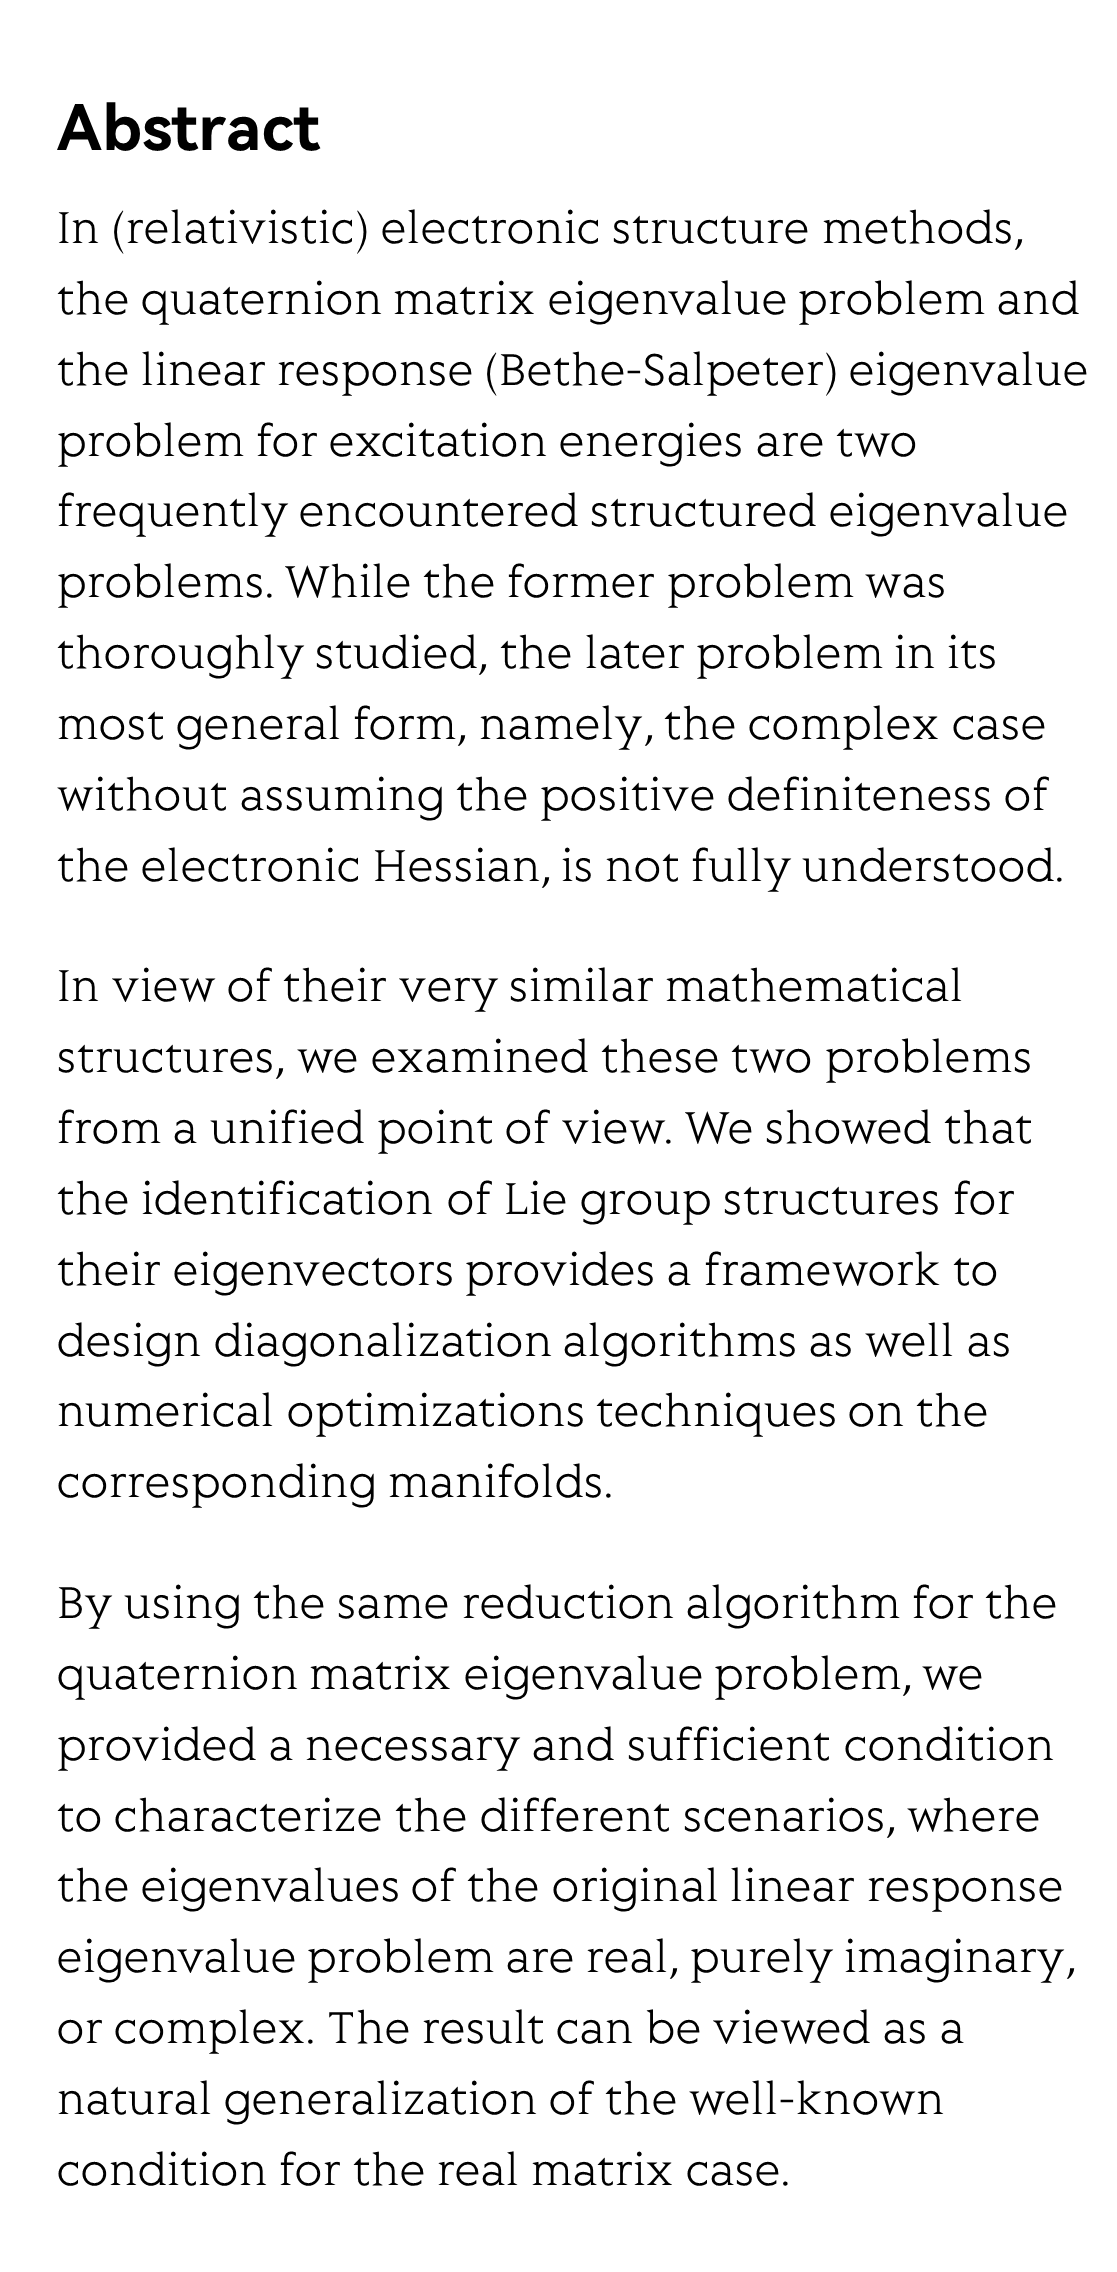 Structured eigenvalue problems in electronic structure methods from a unified perspective_2